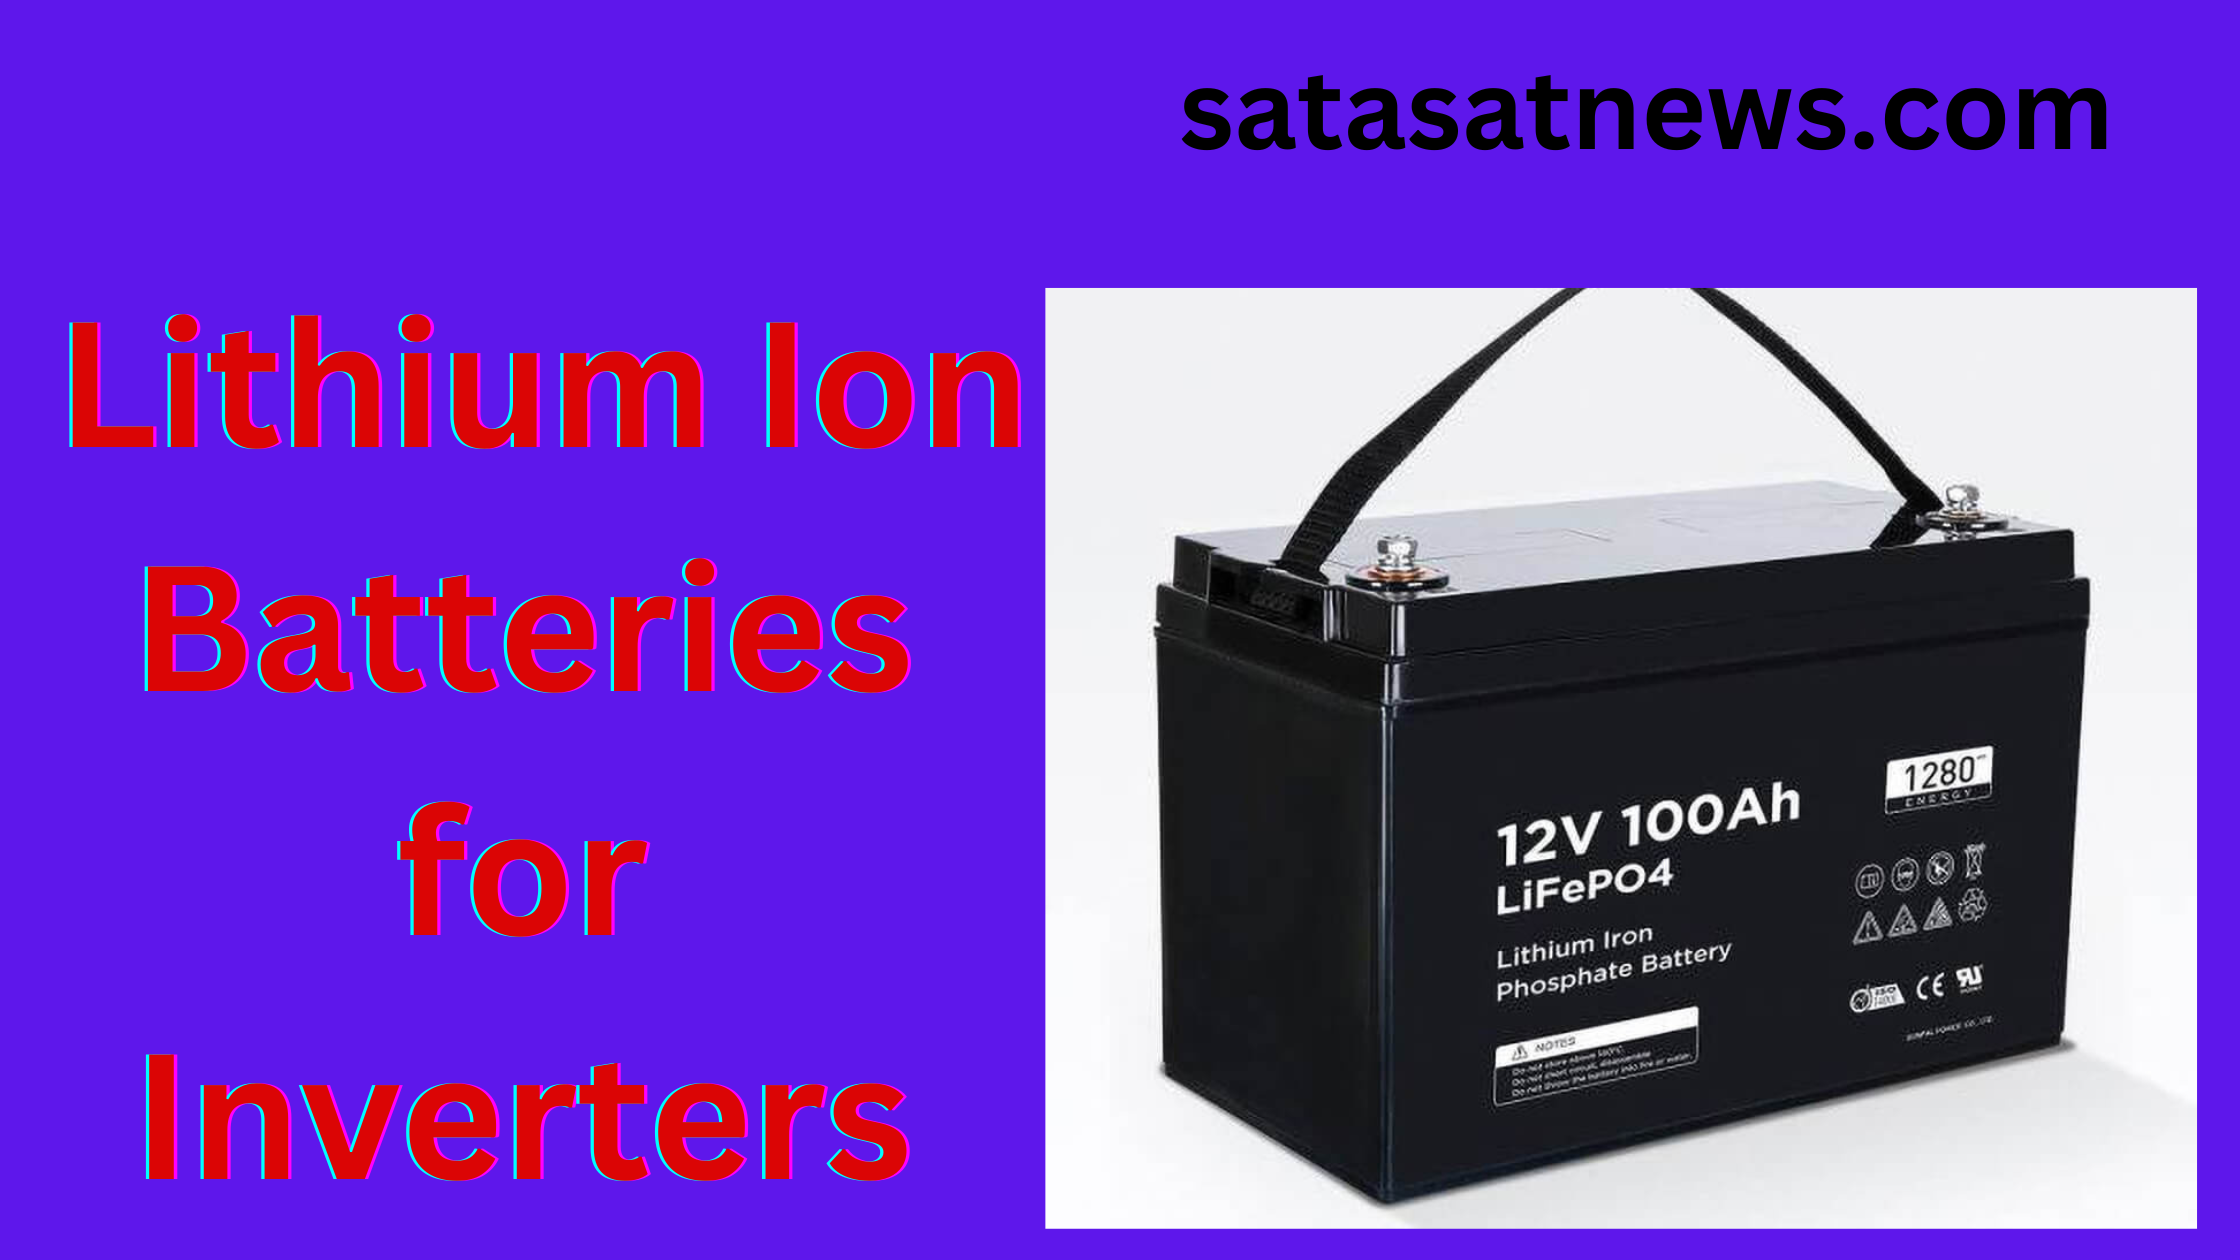 Lithium Ion Batteries for Inverters